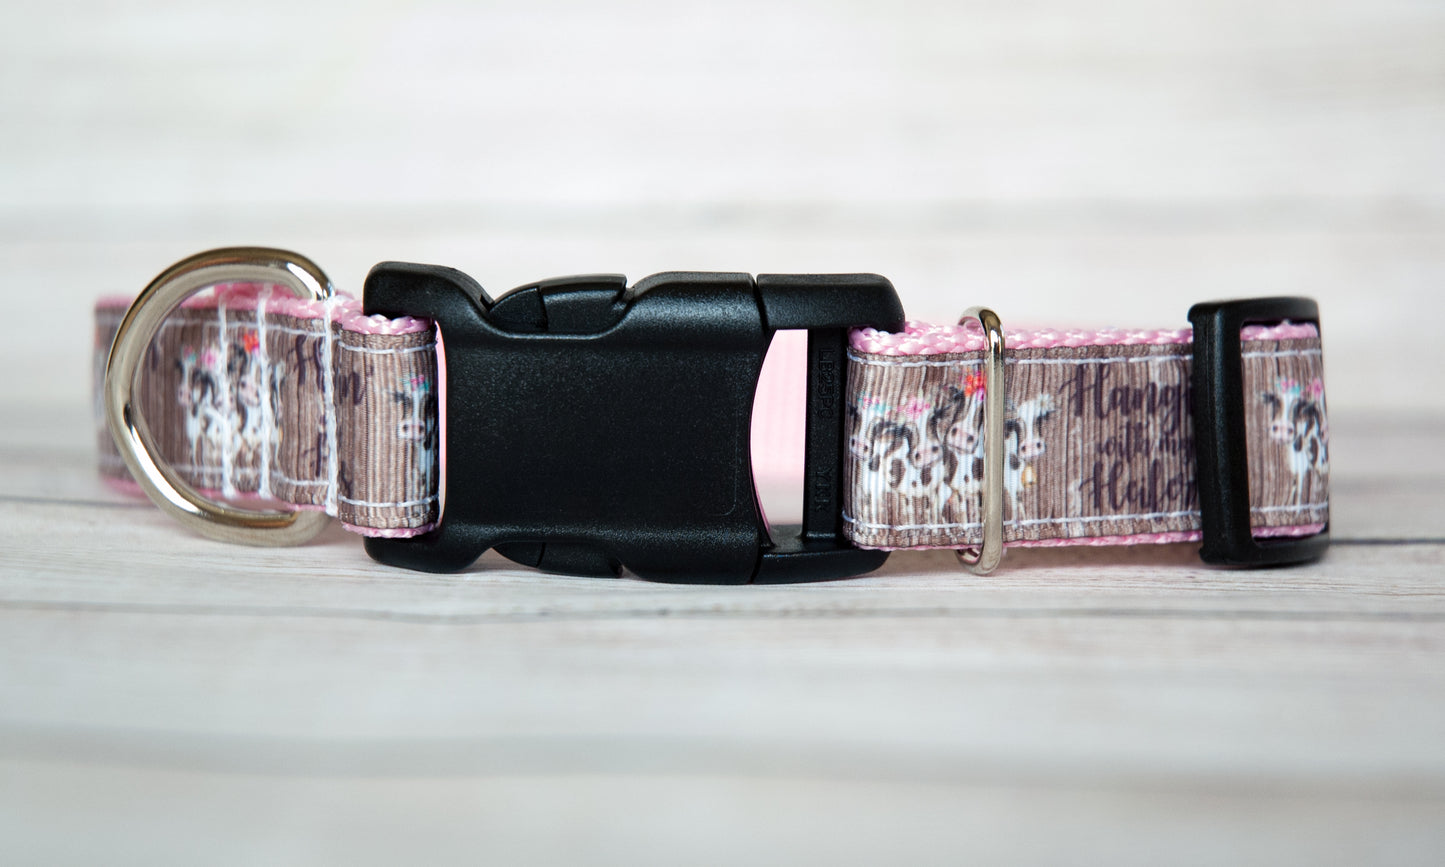 Hangin' with my Heifers dog collar and/or leash. 1 inch wide